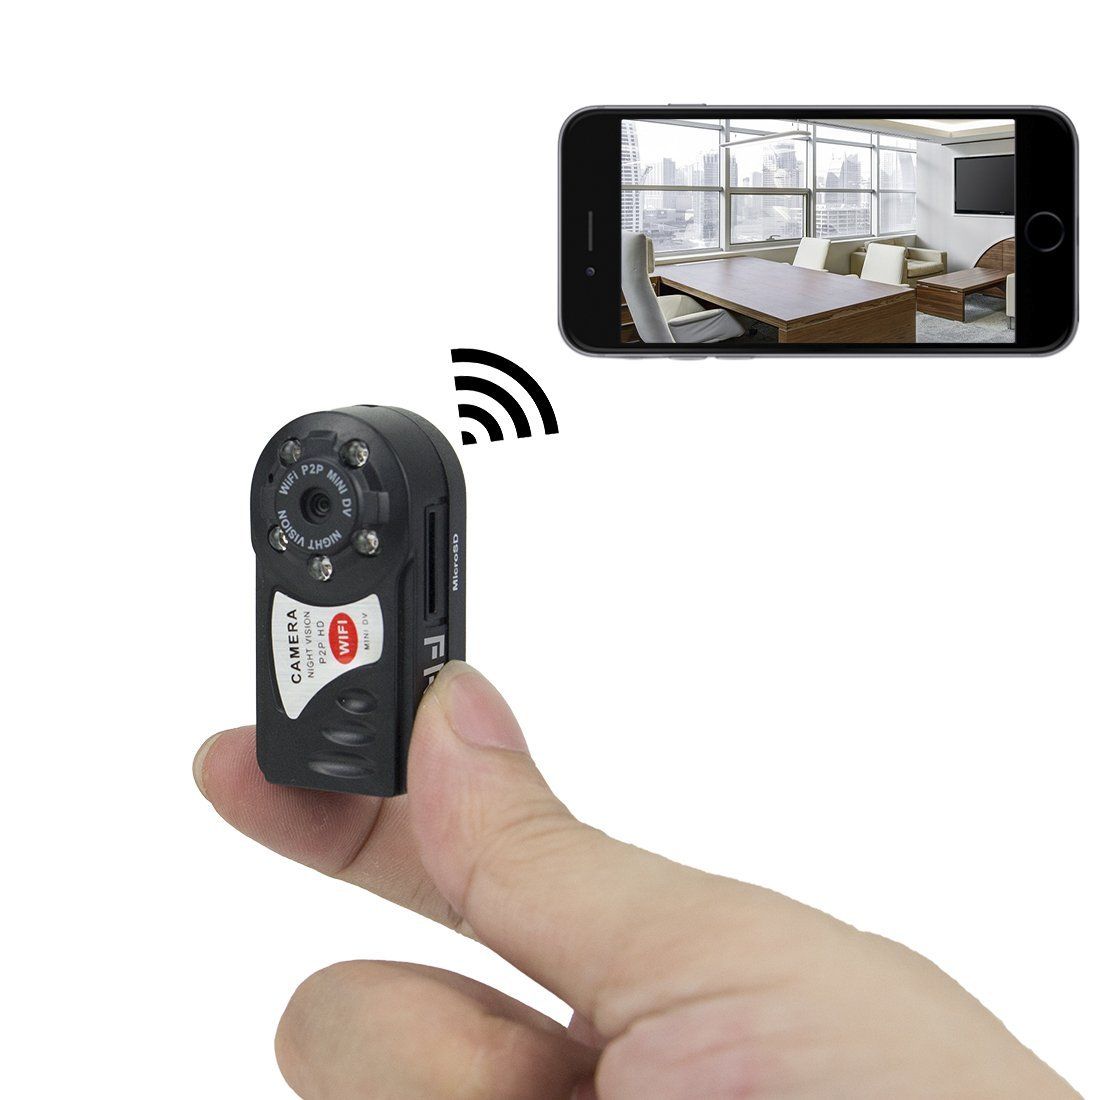 tiny spy cam that connects.to phone